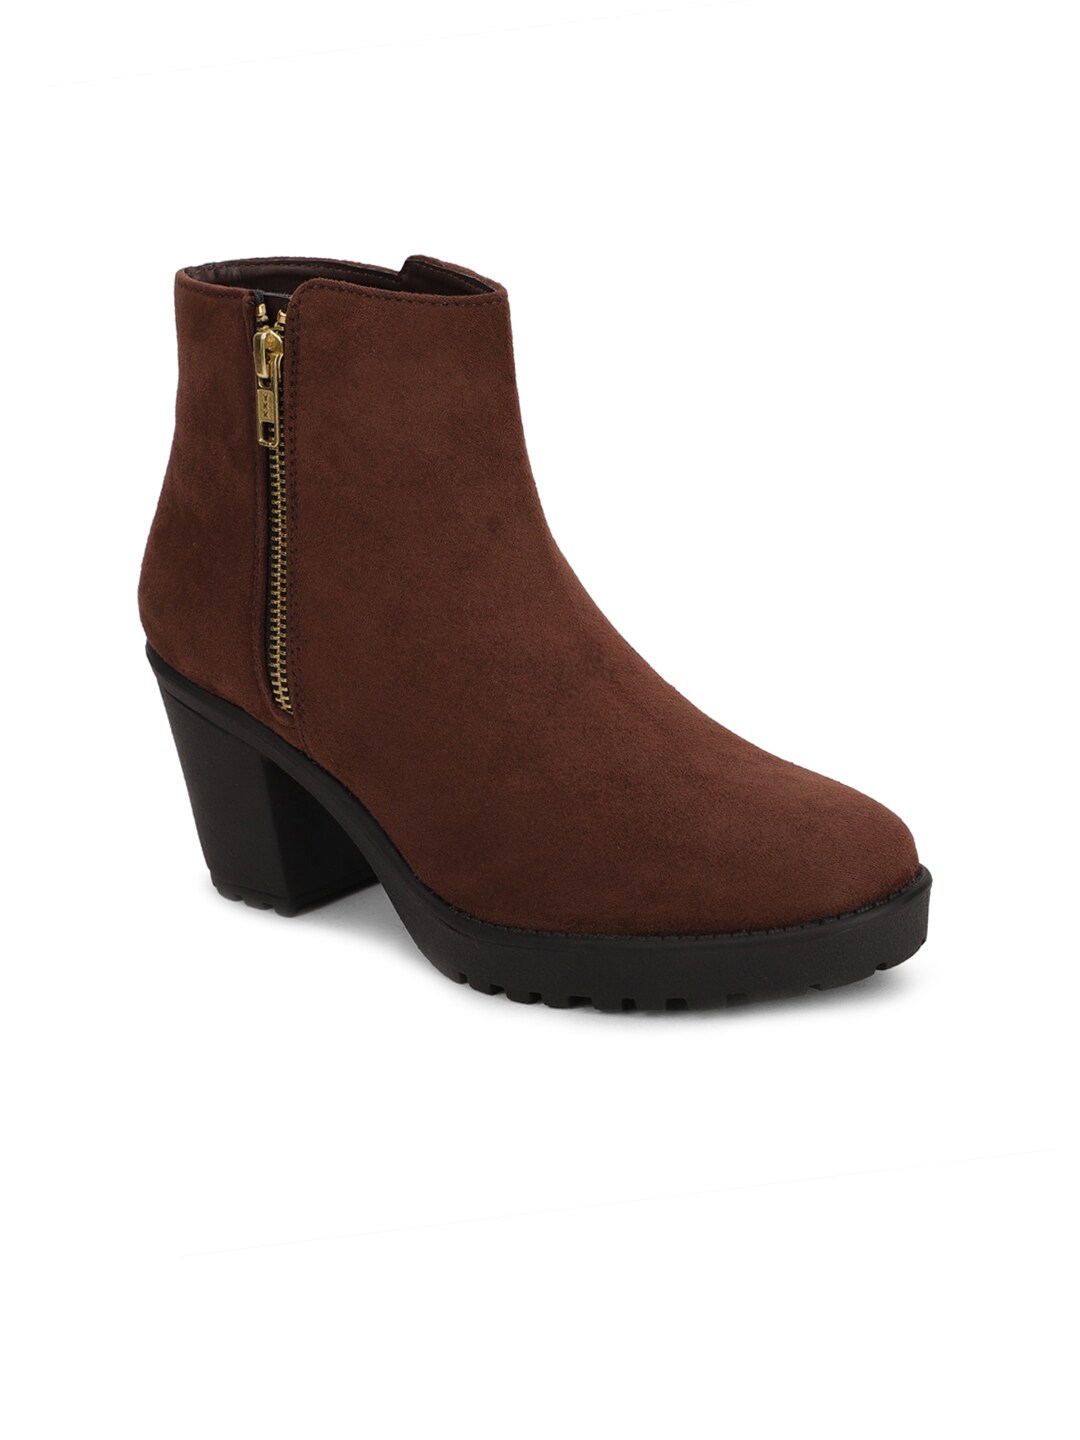 Bruno Manetti Brown Suede Block Heeled Boots Price in India